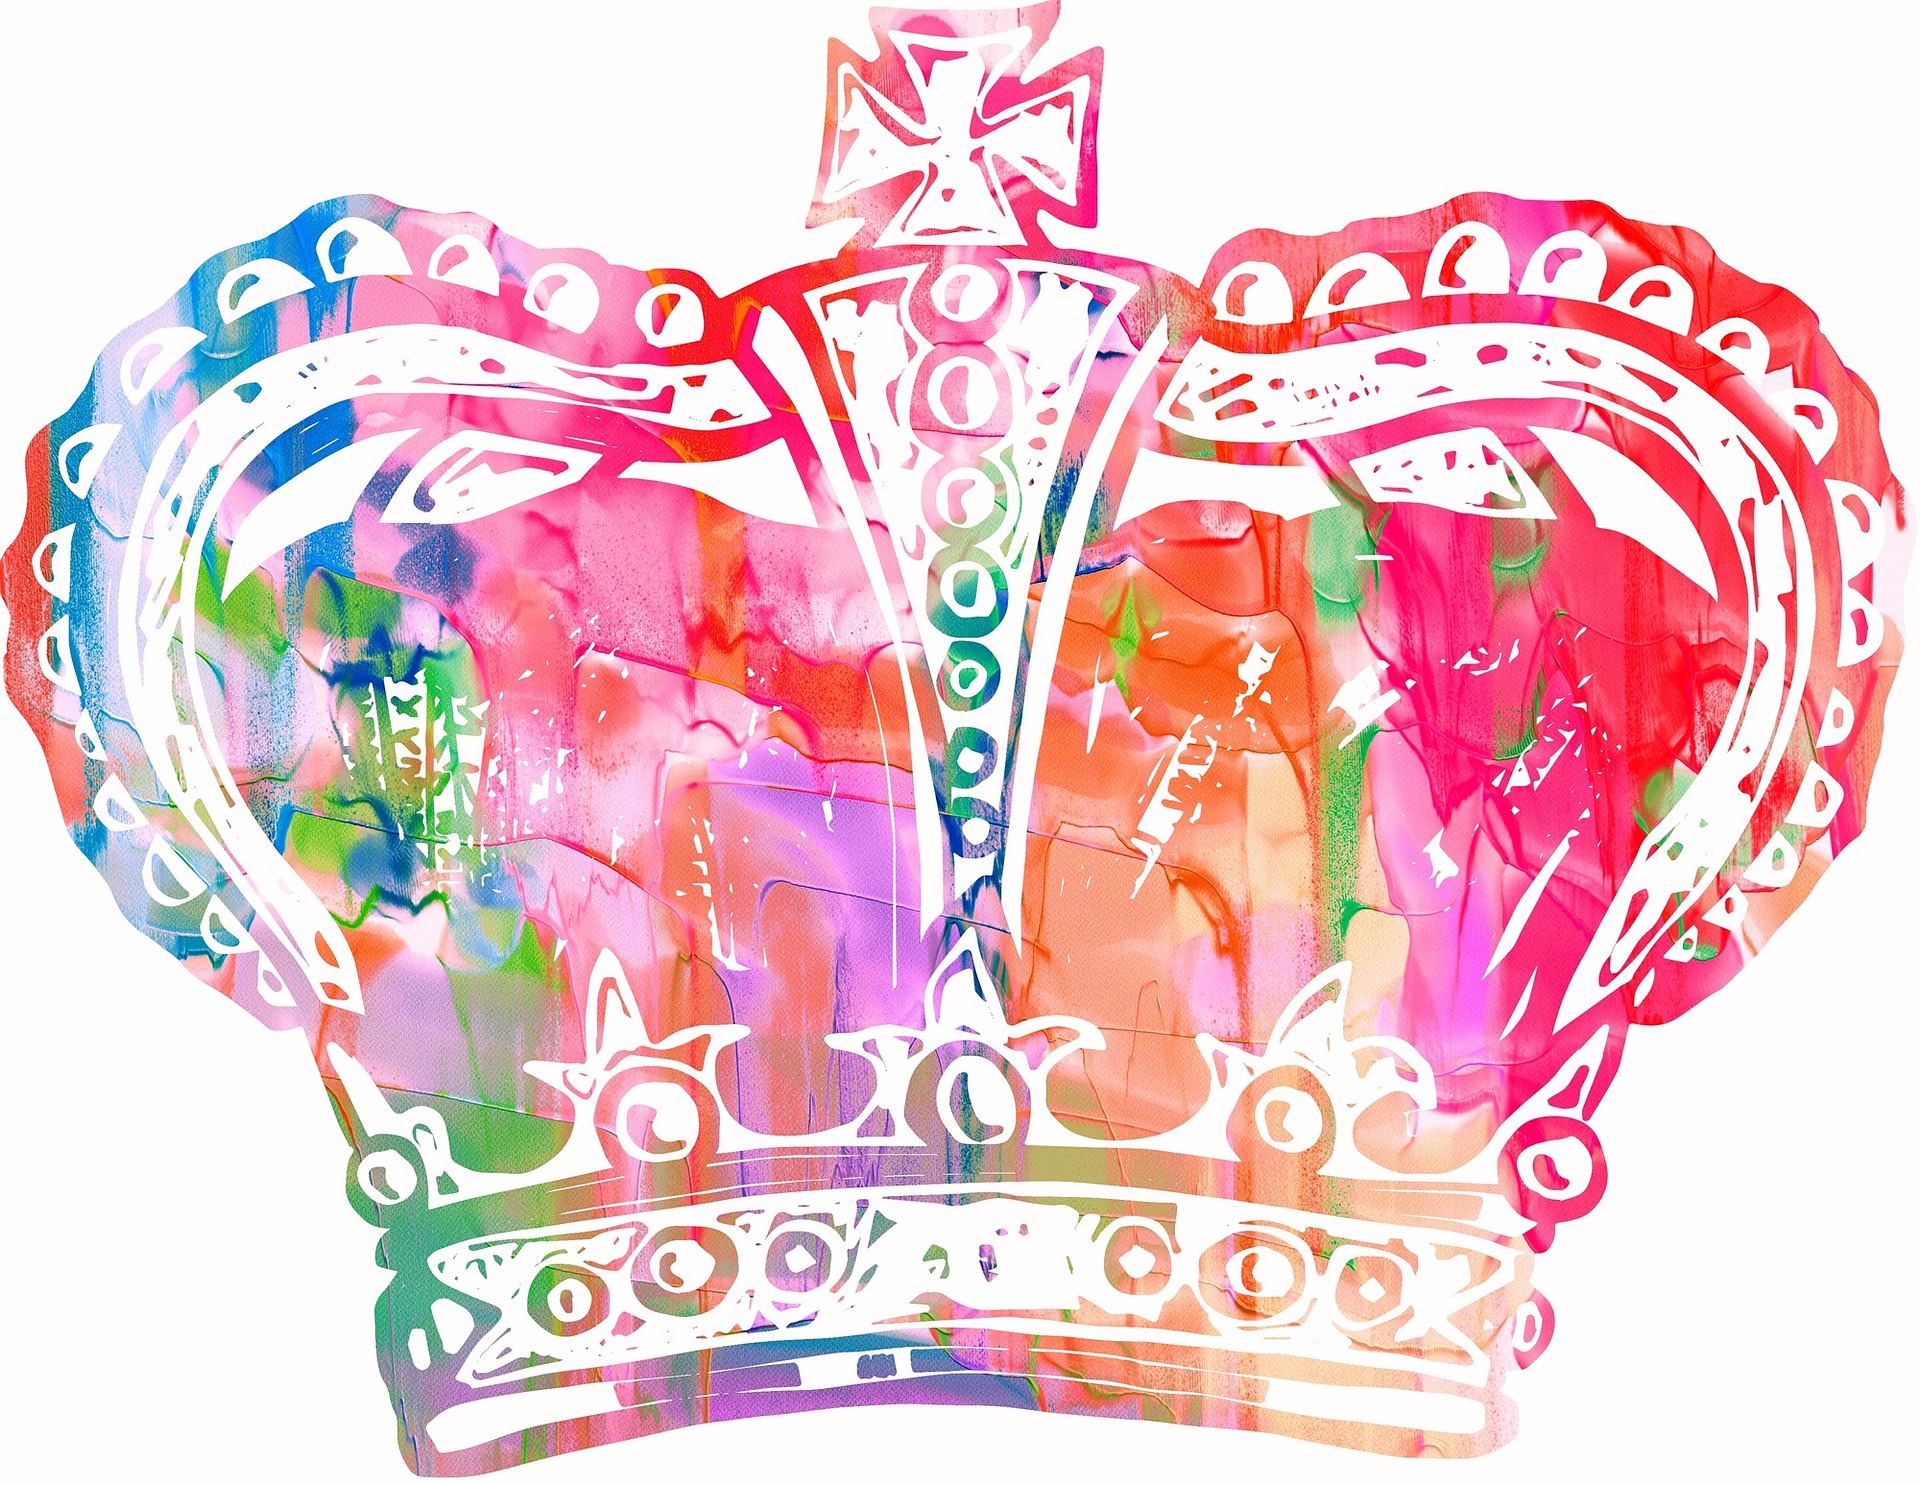 Queen's crown in bright red, blue, purple and green